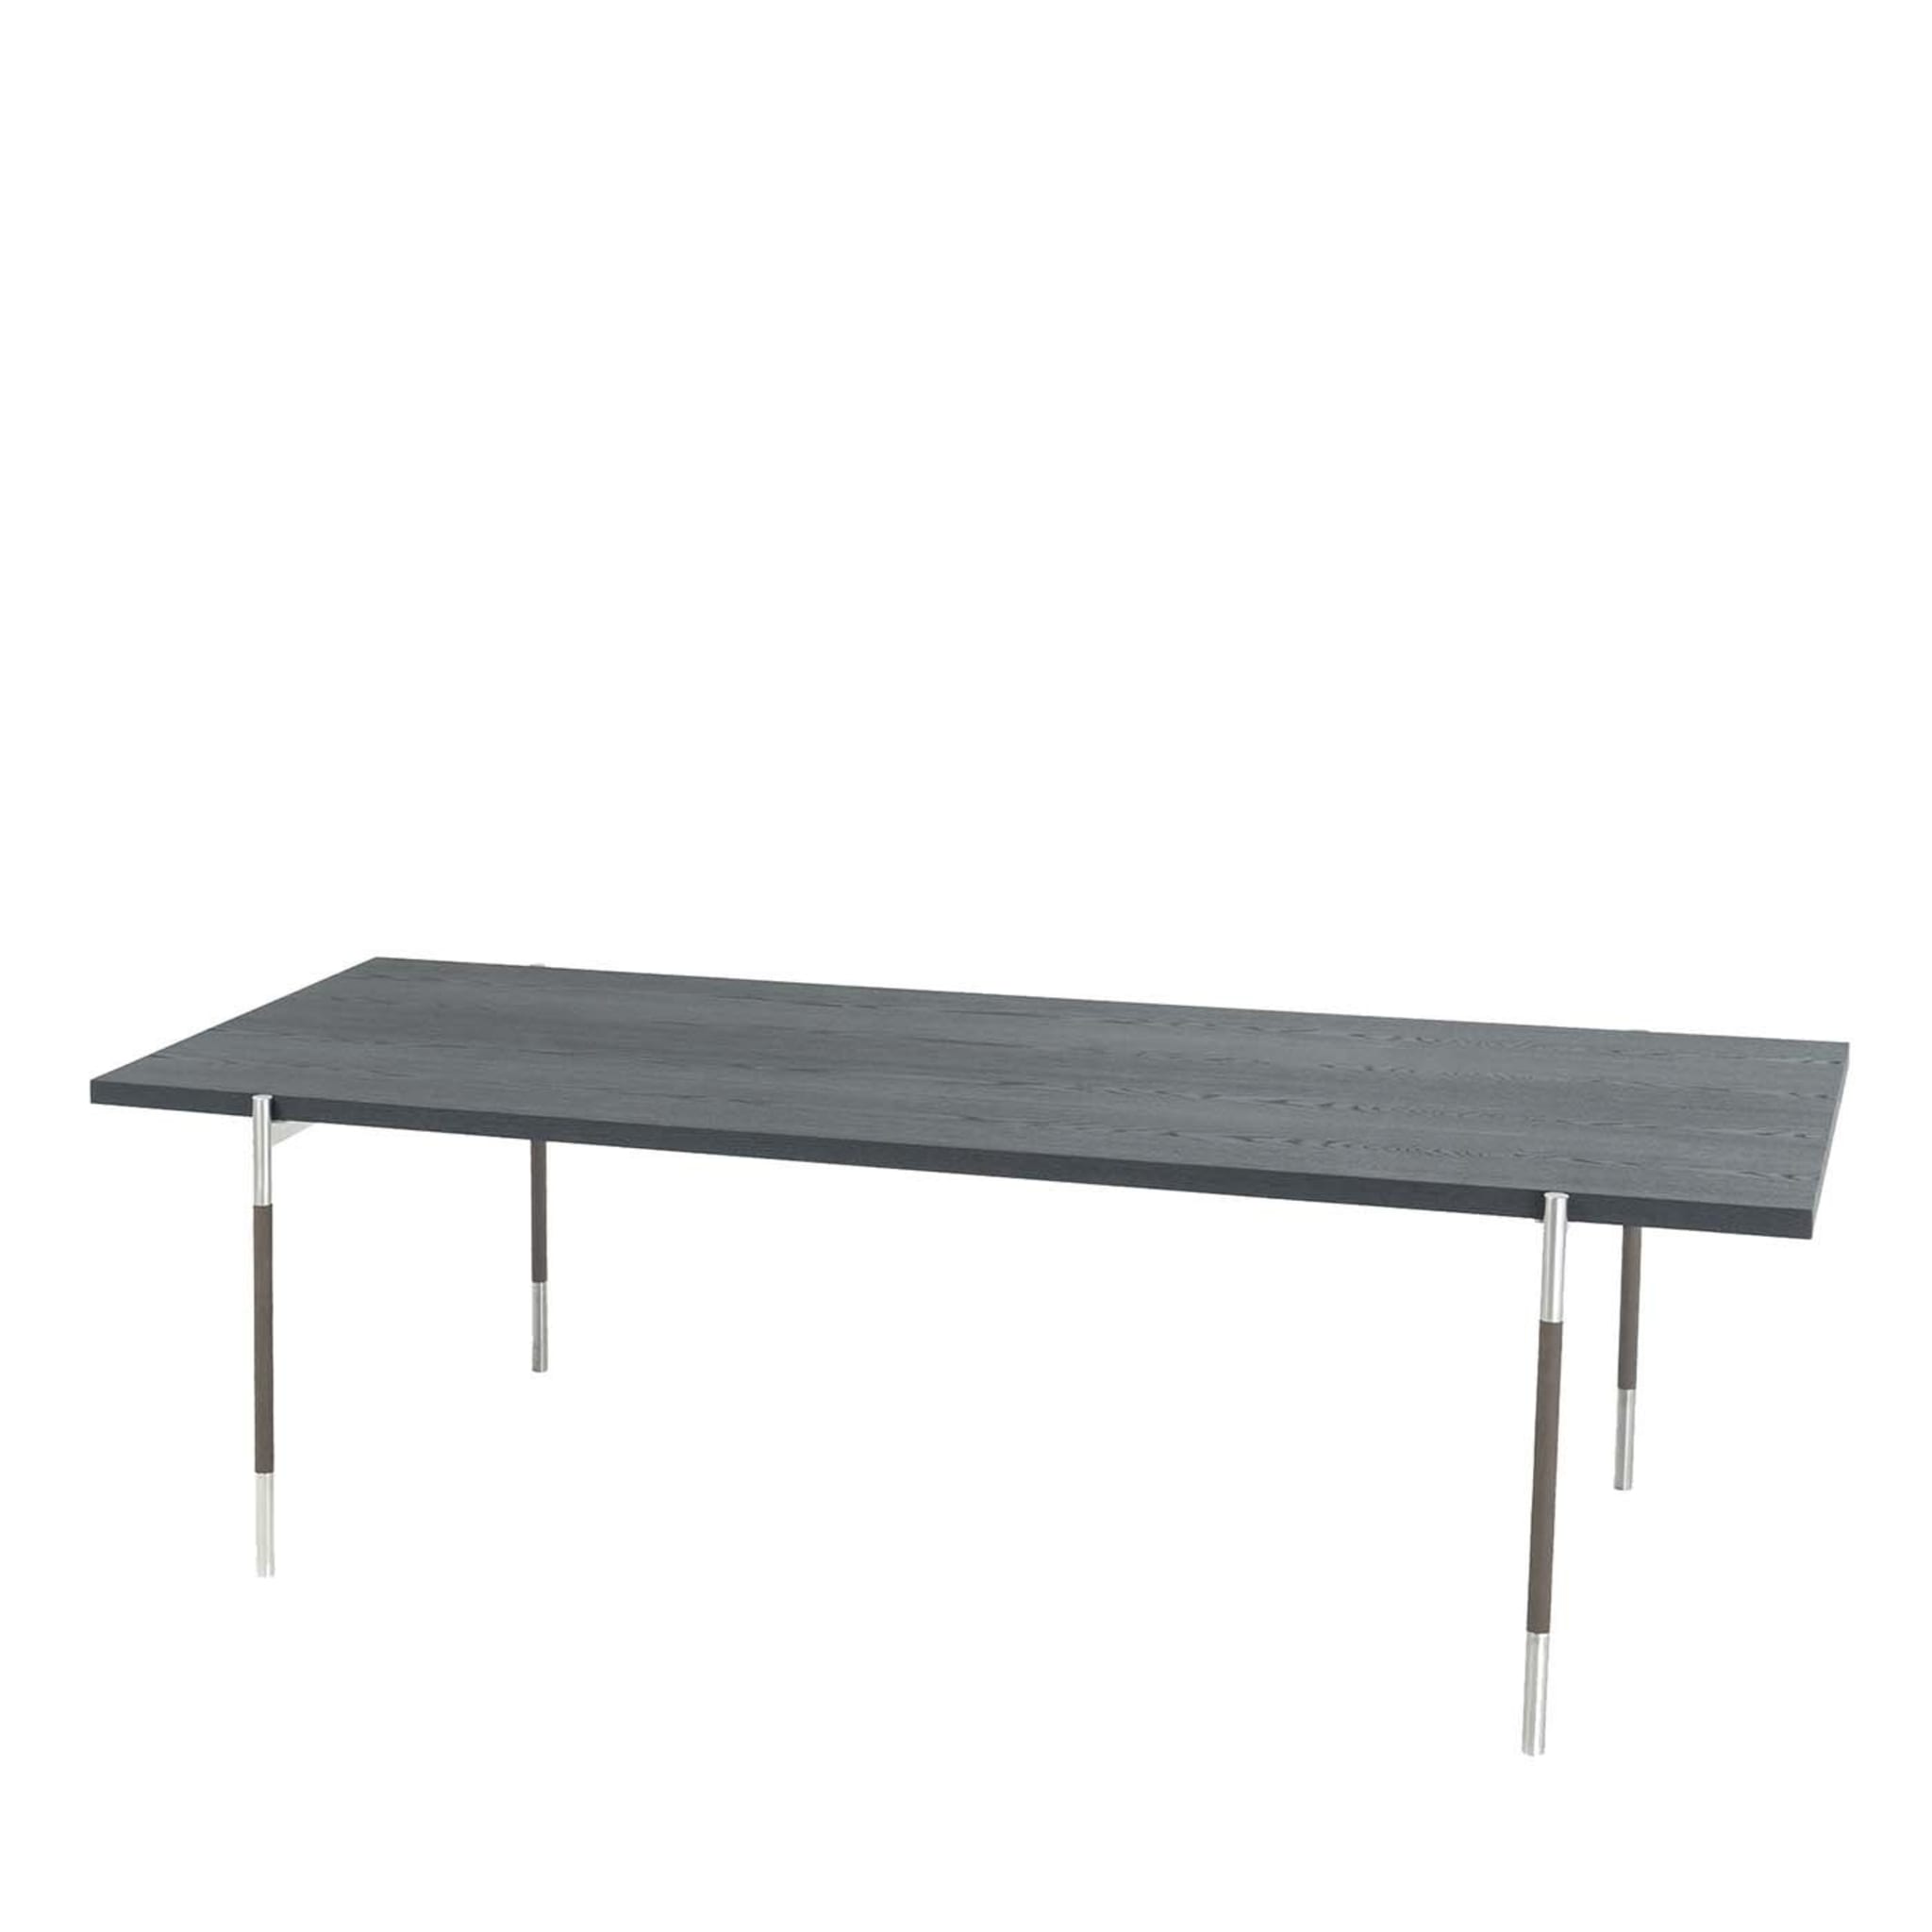 Respiro Table with Oak Top by Michael Schoeller - Main view